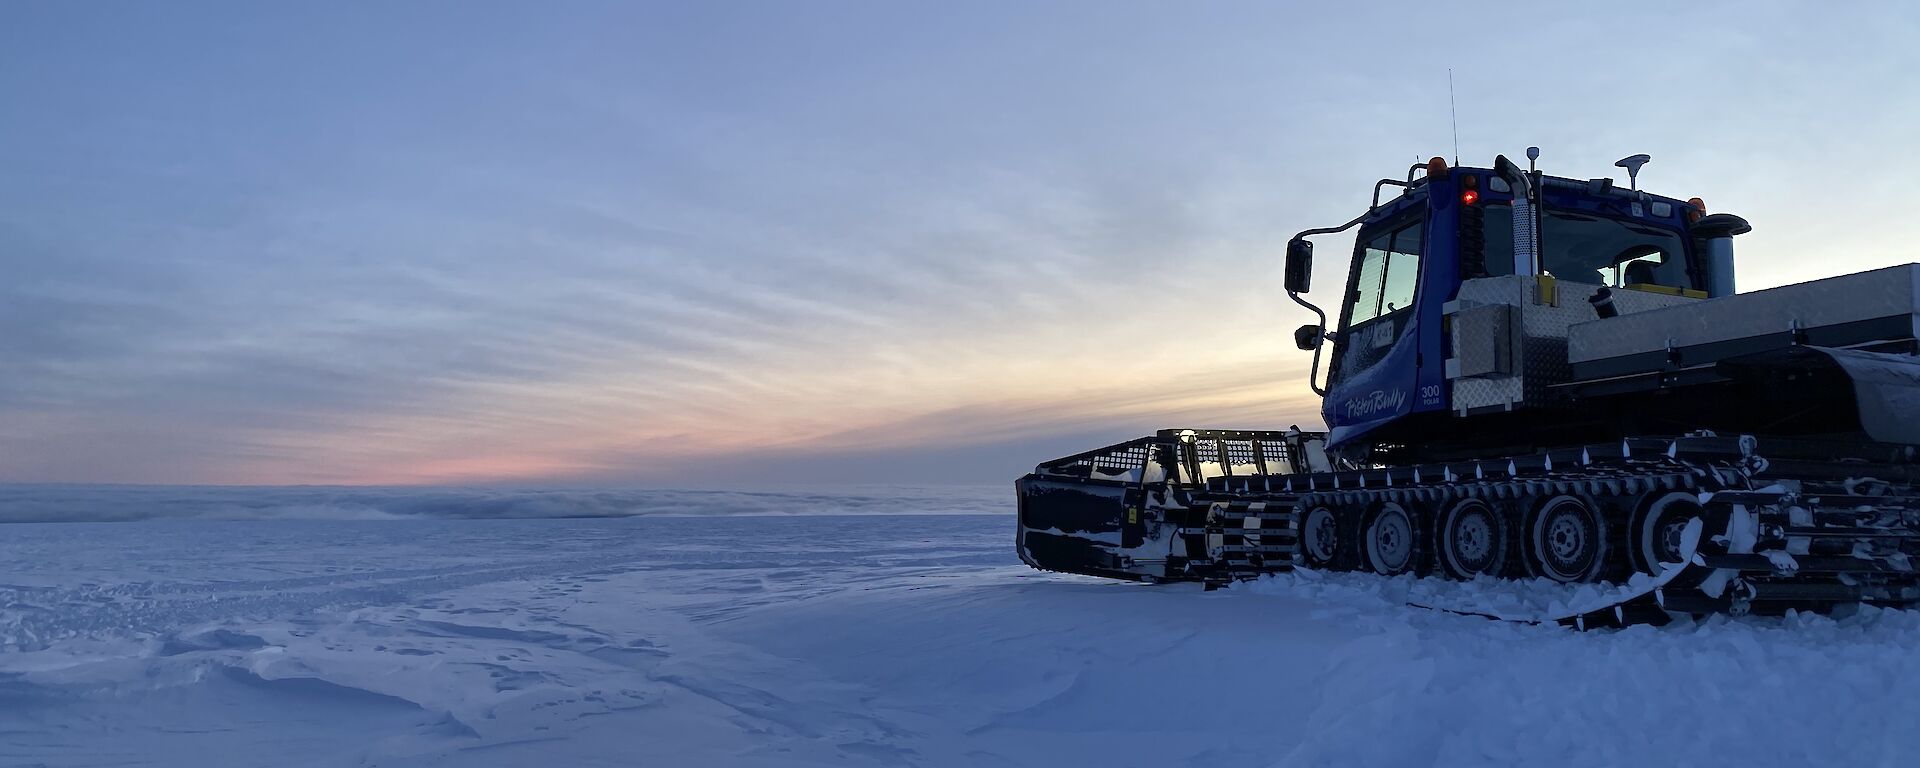 A snow groomer vehicle smoothing out an area on a wide, snowy plain under a twilight sky.